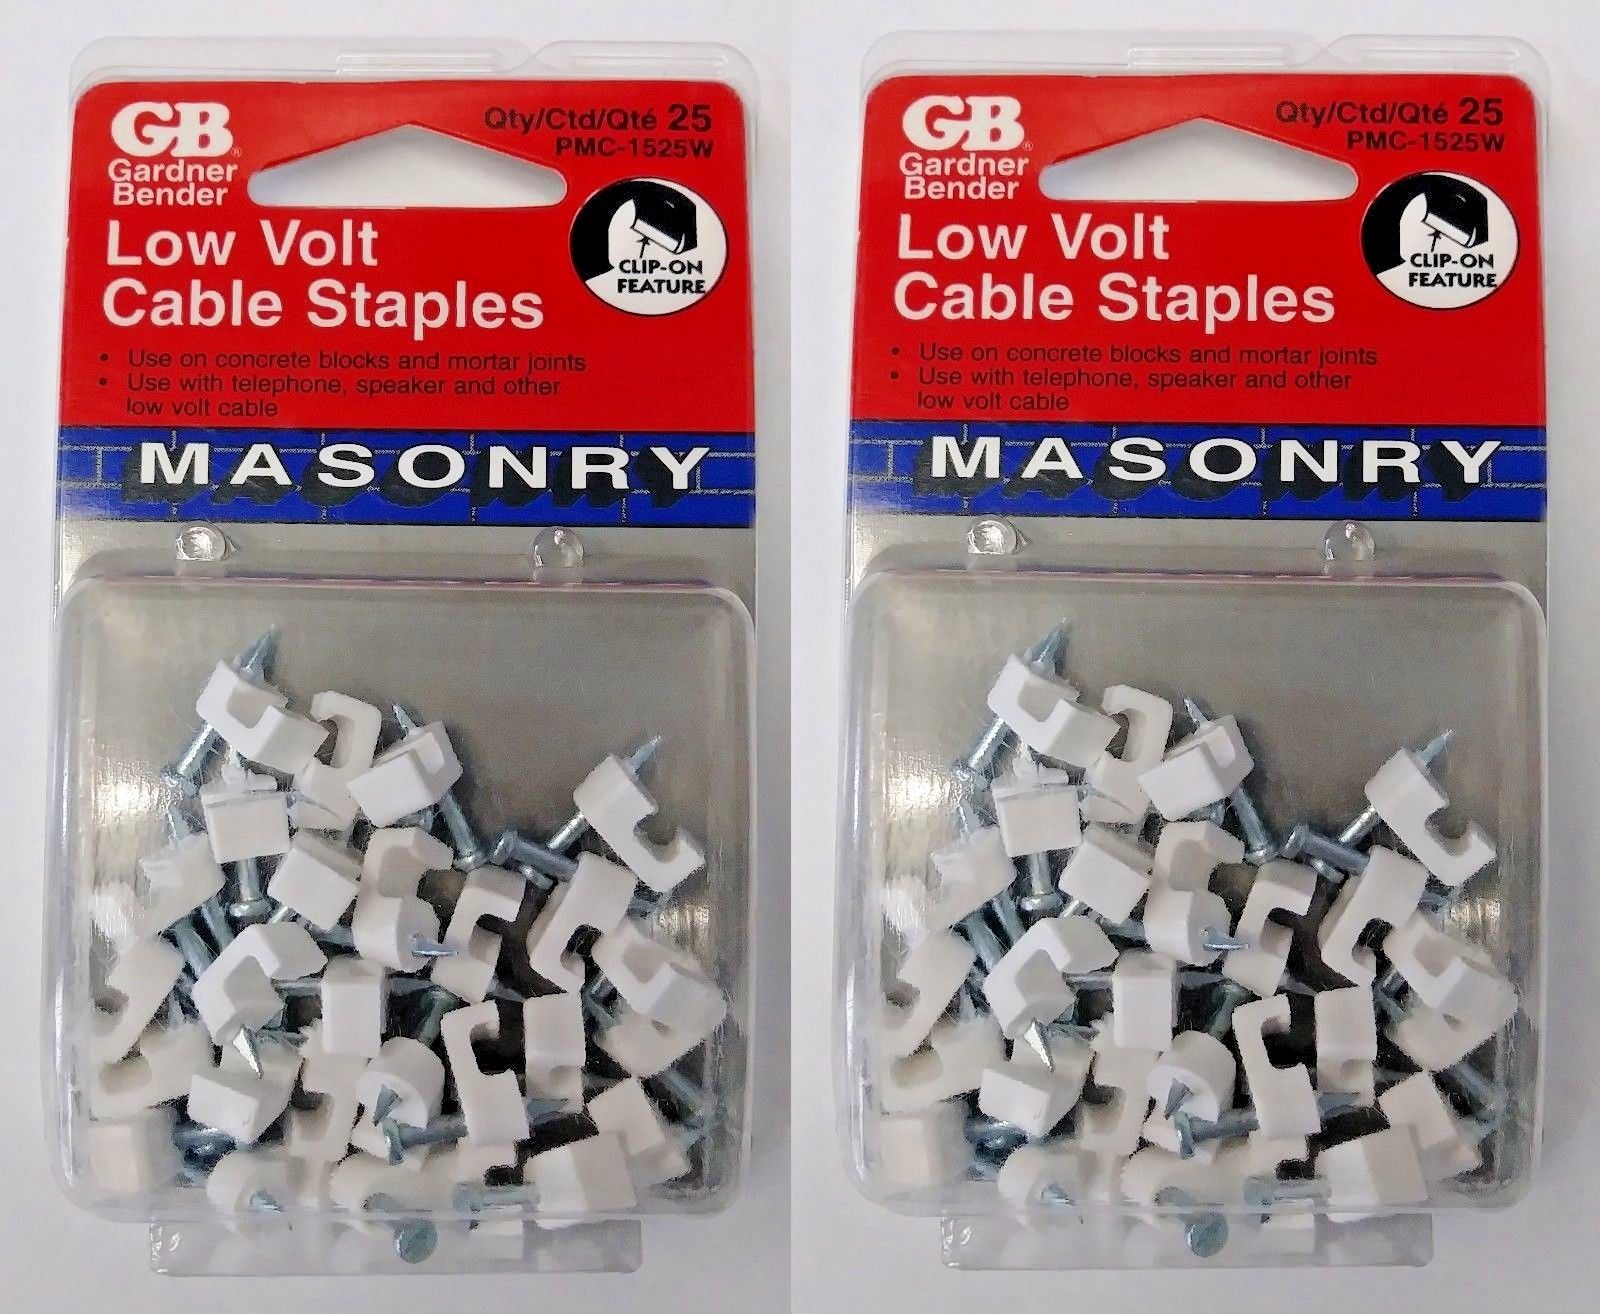 Gardner Bender PMC-1525W 3/16" Low Volt Cable Staples USA (2 Packs of 25)